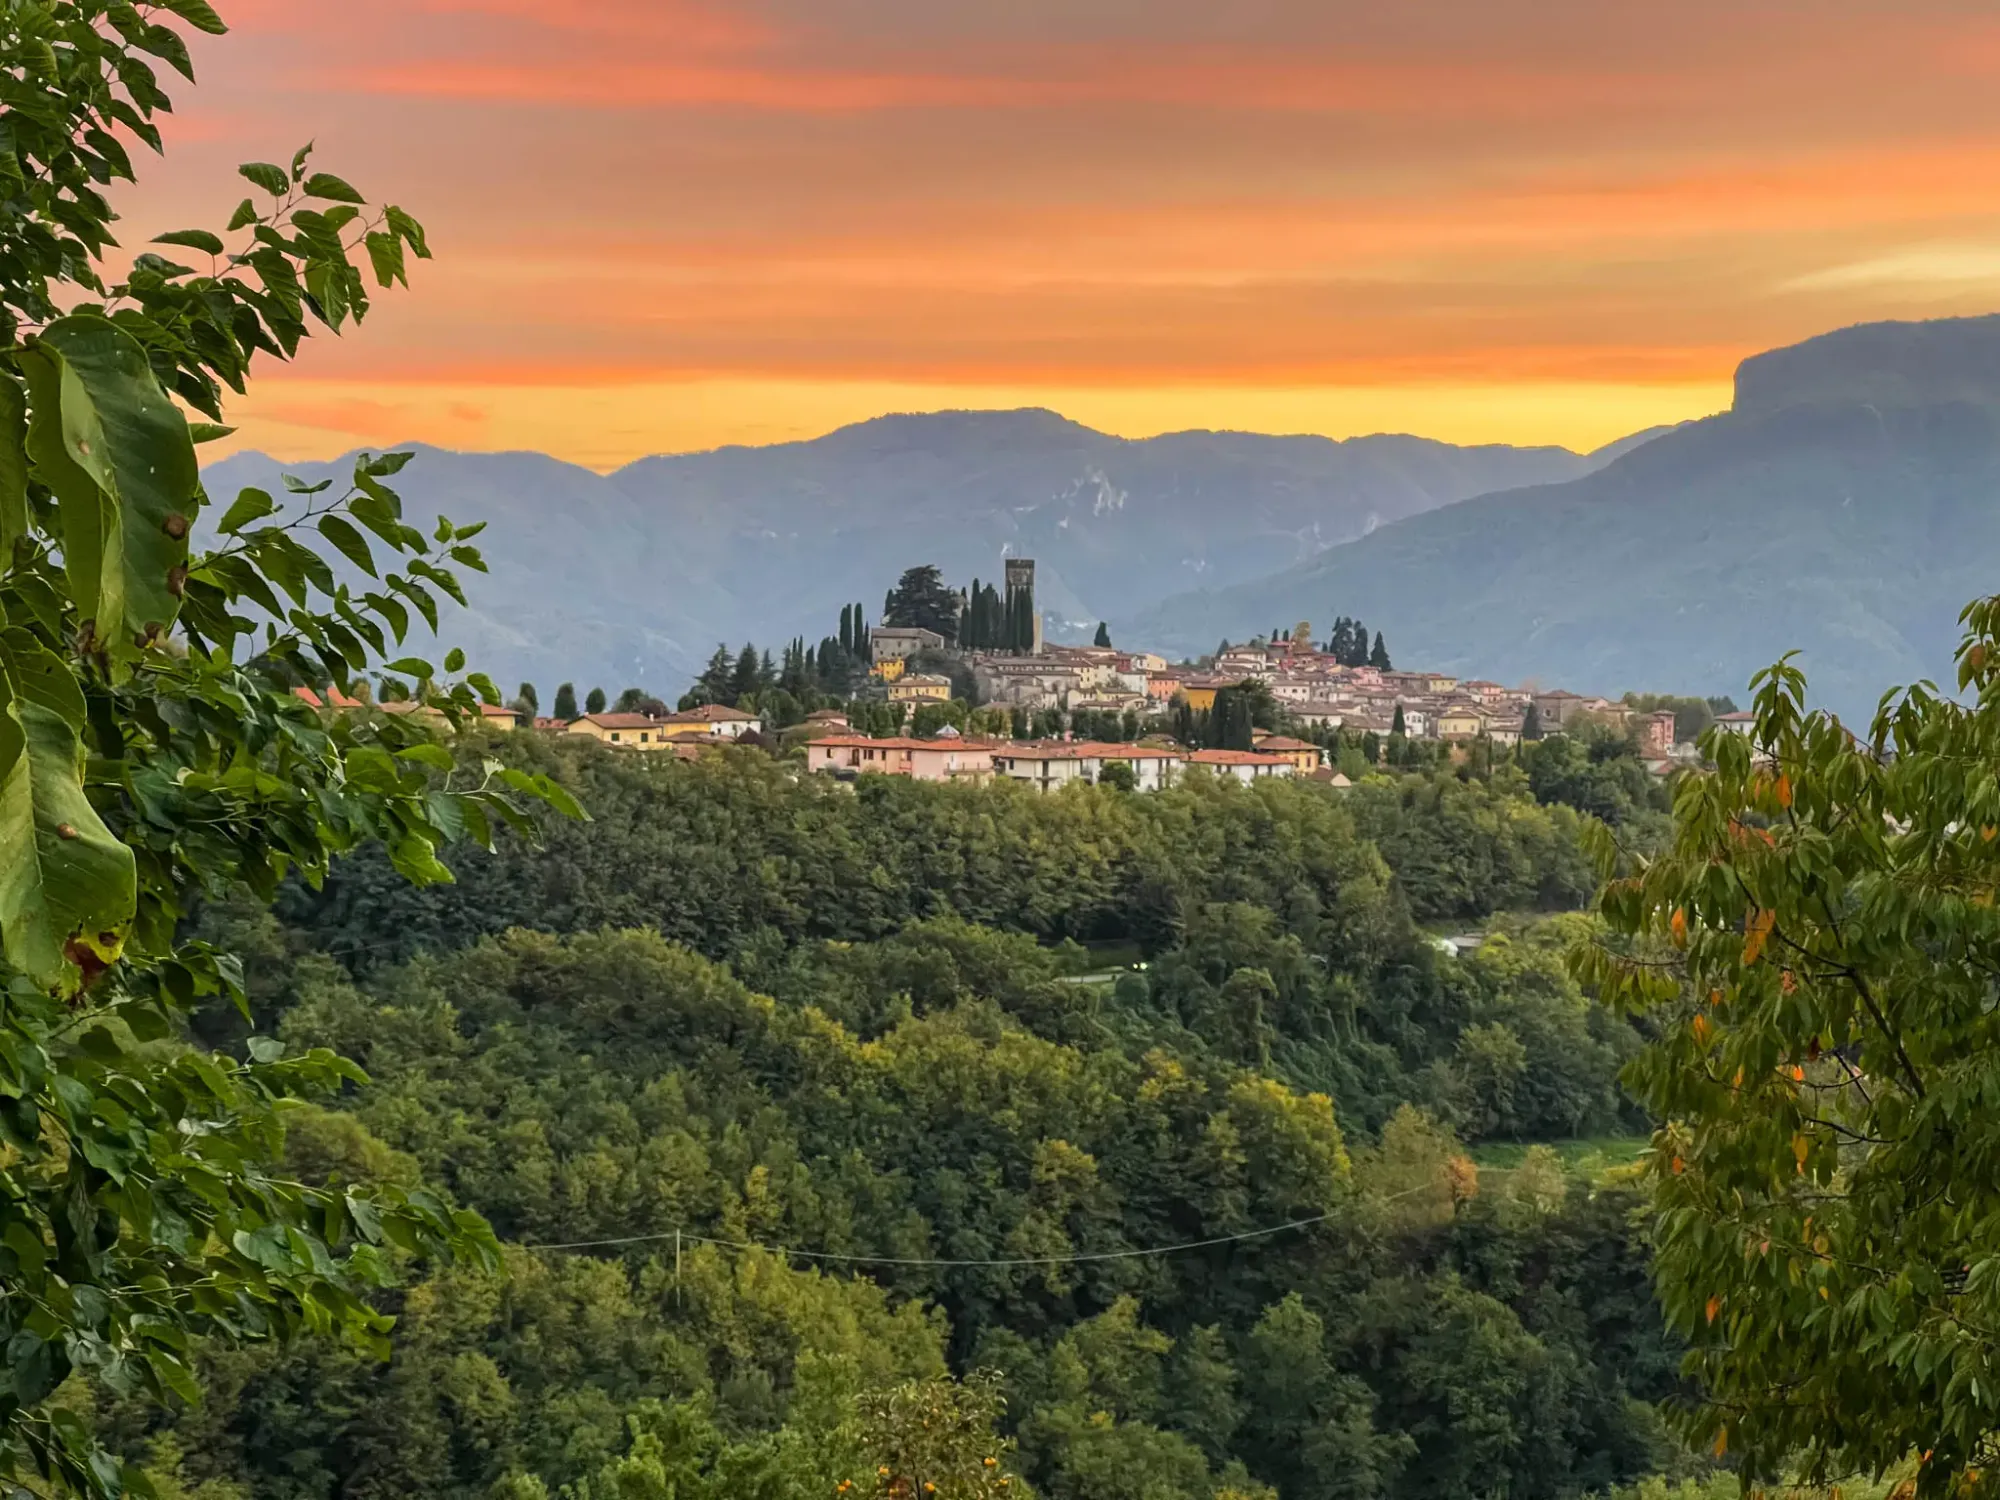 A view of Barga, Italy.